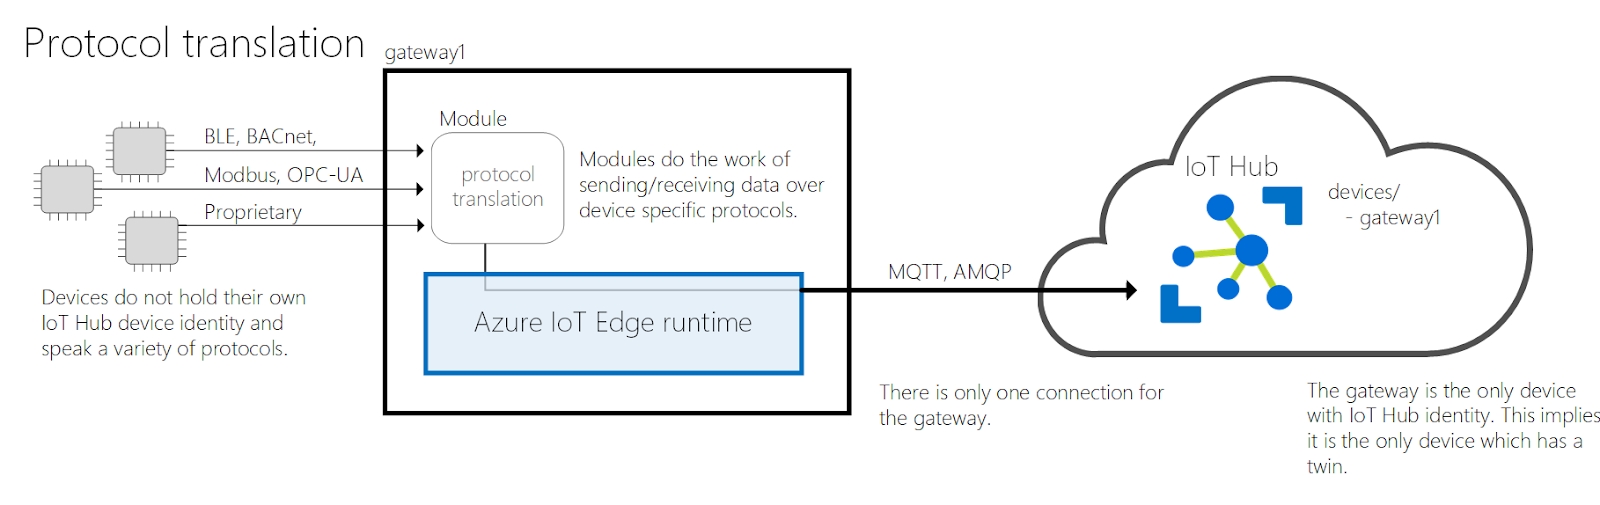 Protocol translation  gatewayt

Module
BLE, BACnet, ————

Modbus, OPC-UA

protocol Modules do the work of loT Hub
5 sending/receiving data over
translation | Geyi ra
levice specific protocols.

Proprietar

Devices do not hold their own
loT Hub device identity and

Azure loT Edge runtime
speak a variety of protocols

devices/
- gateway!

MQTT, AMQP

L

There is only one connection for The gateway is the only device
the gateway. with loT Hub identity. This implies

it is the only device which has a
twin.